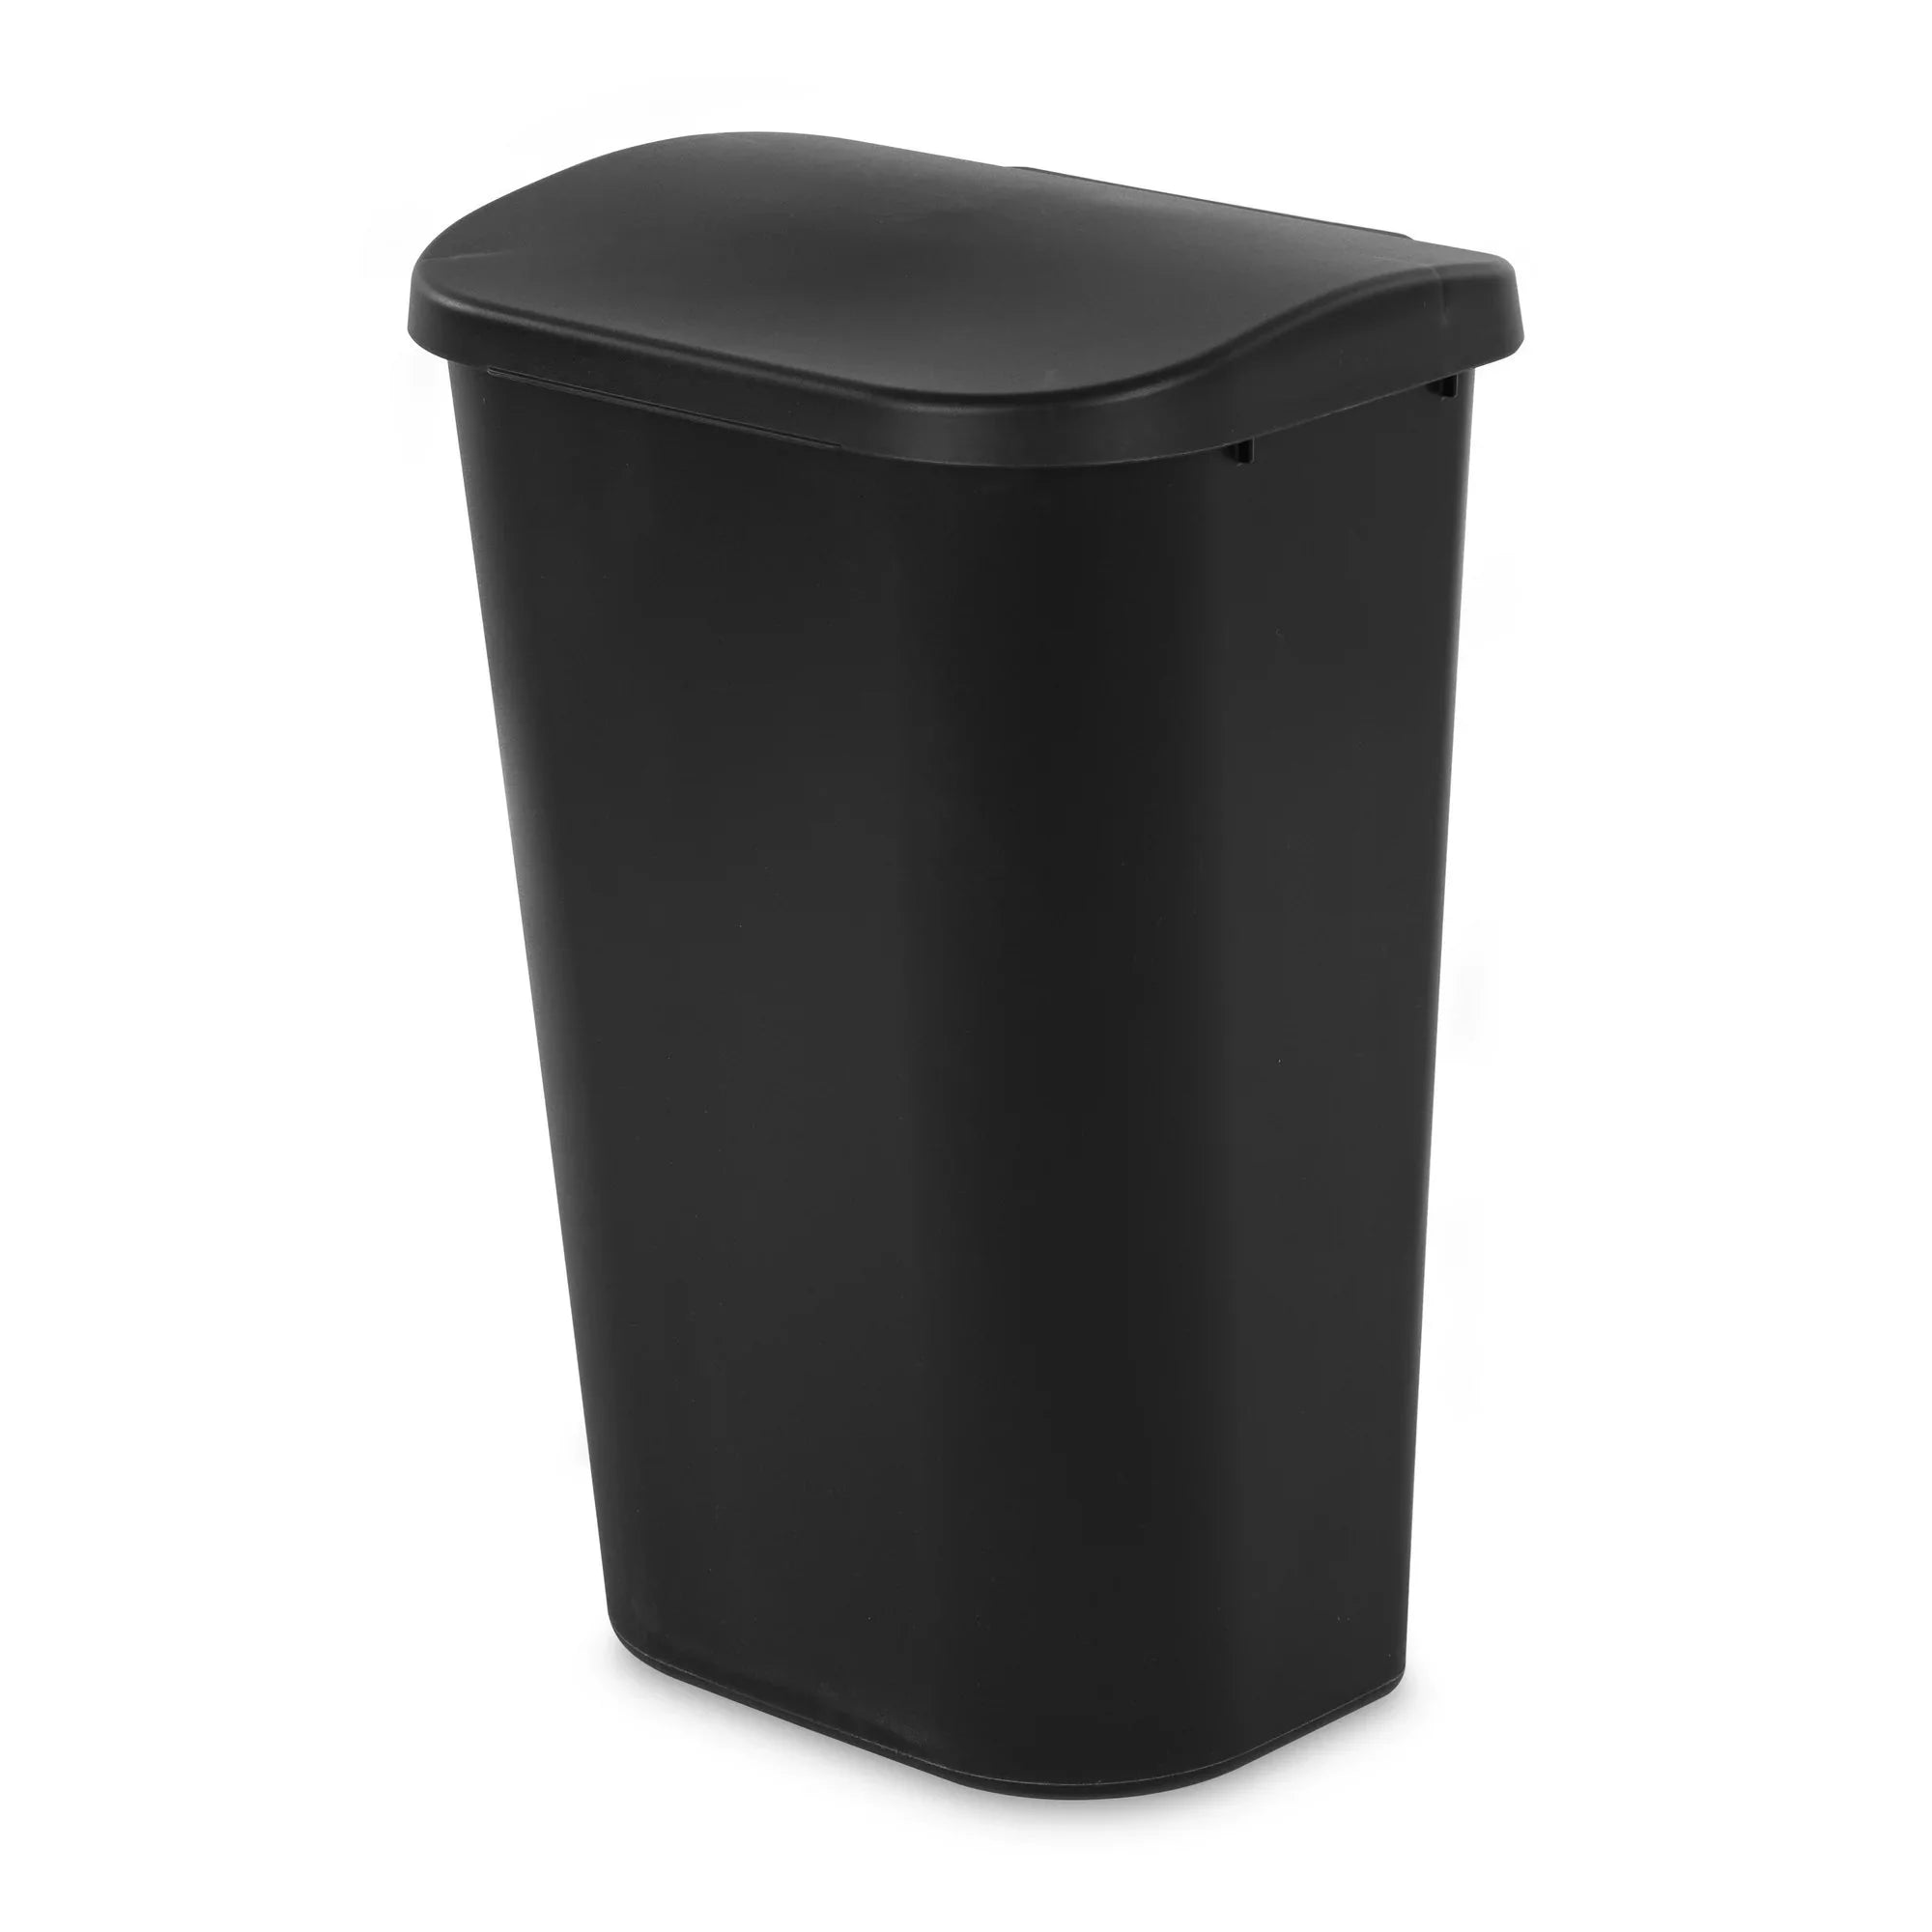 Wholesale prices with free shipping all over United States Sterilite 11.3 Gal. Lift Top Wastebasket Plastic, Black - Steven Deals